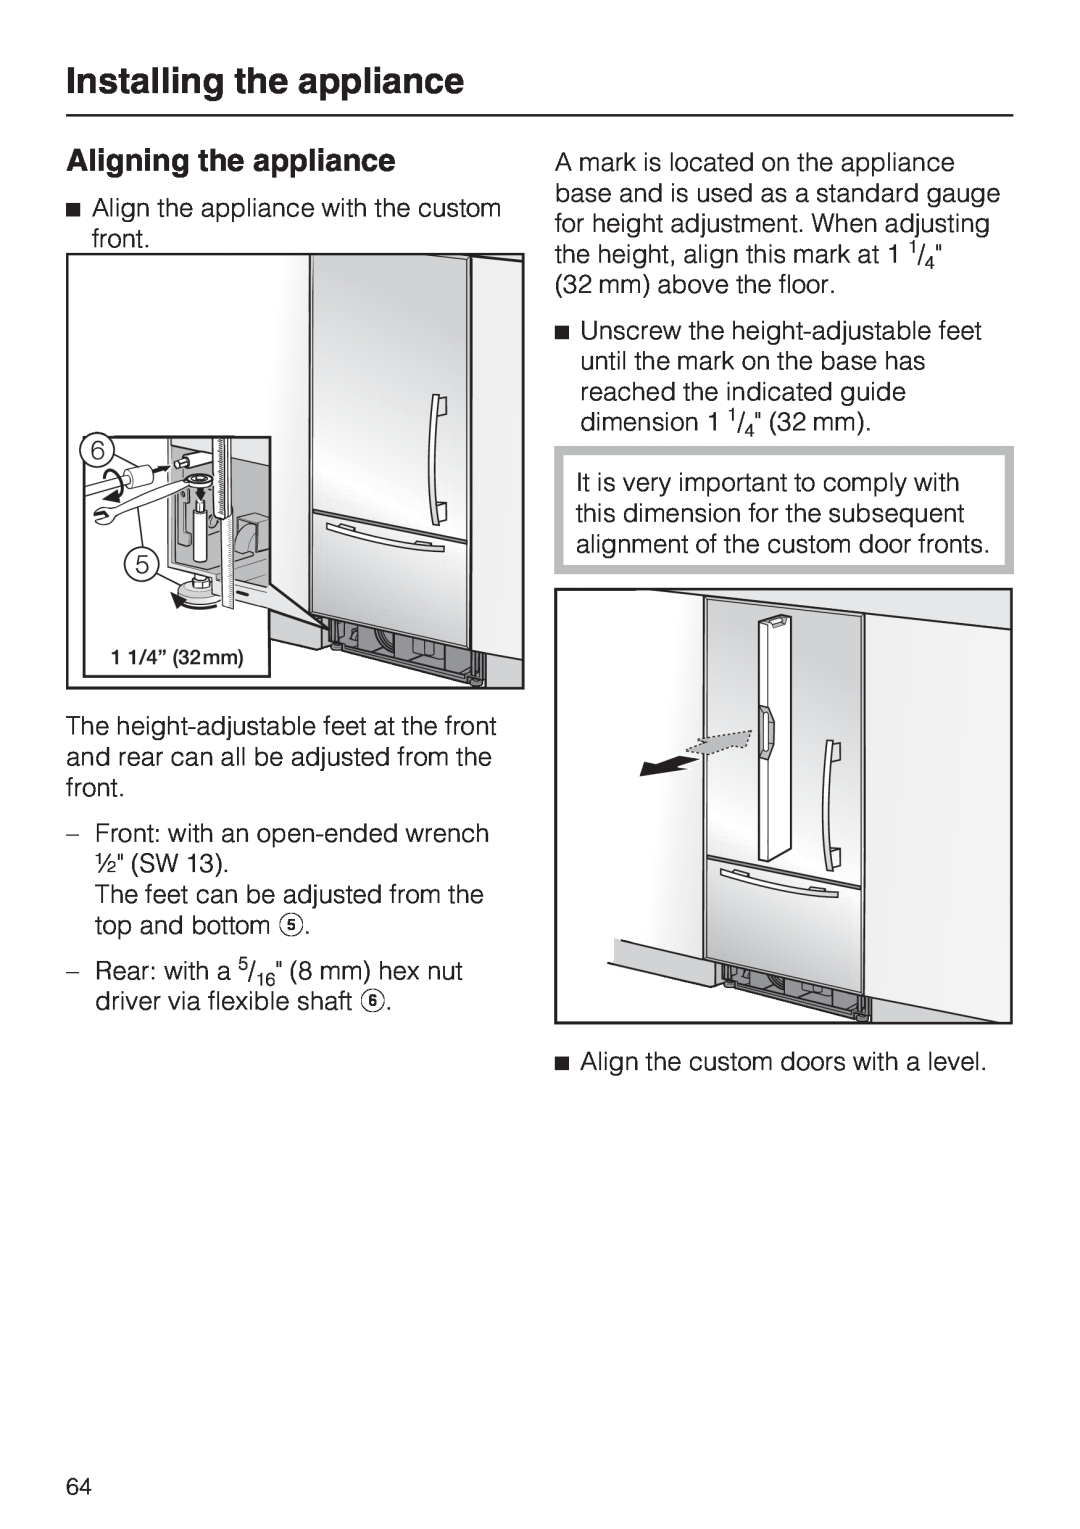 Miele KF1811SF, KF1901SF, KF1801SF, KF1911SF installation instructions Aligning the appliance, Installing the appliance 